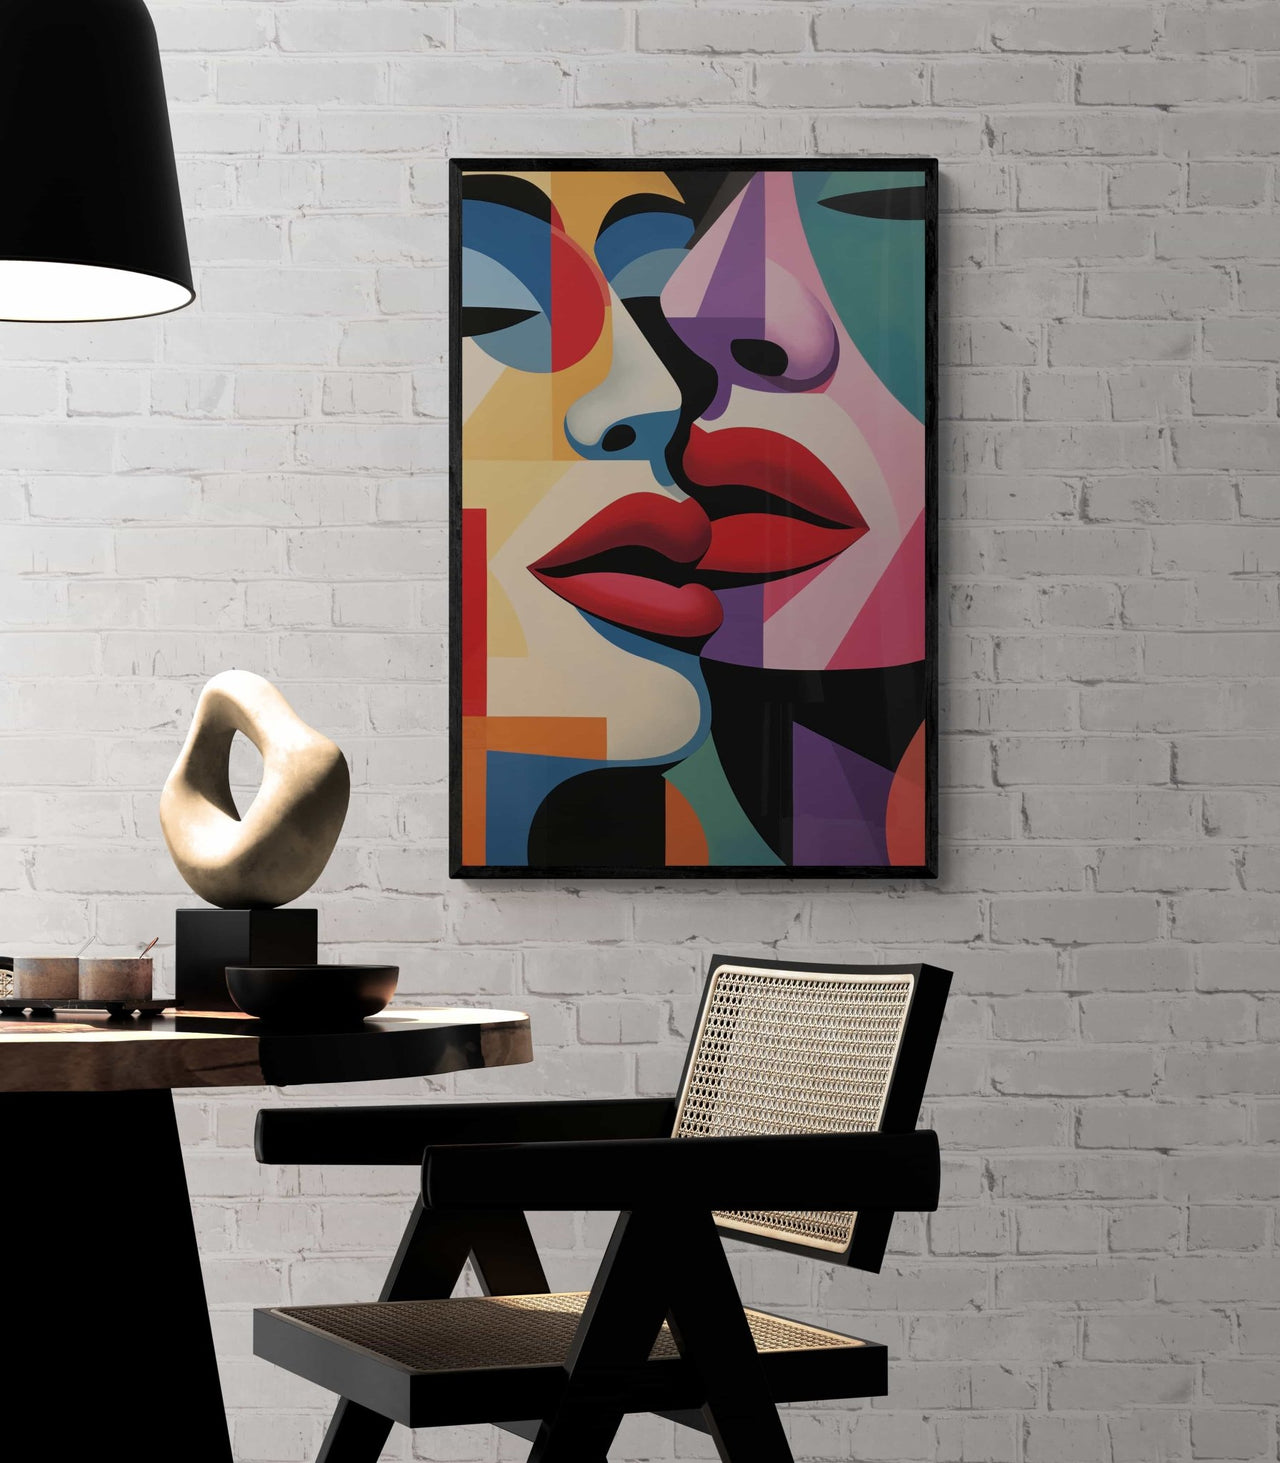 Colorful abstract canvas print by Milton Wes Art, featuring overlapping geometric faces in bold colors, displayed on a white brick wall in a stylish interior with modern furniture and decor.